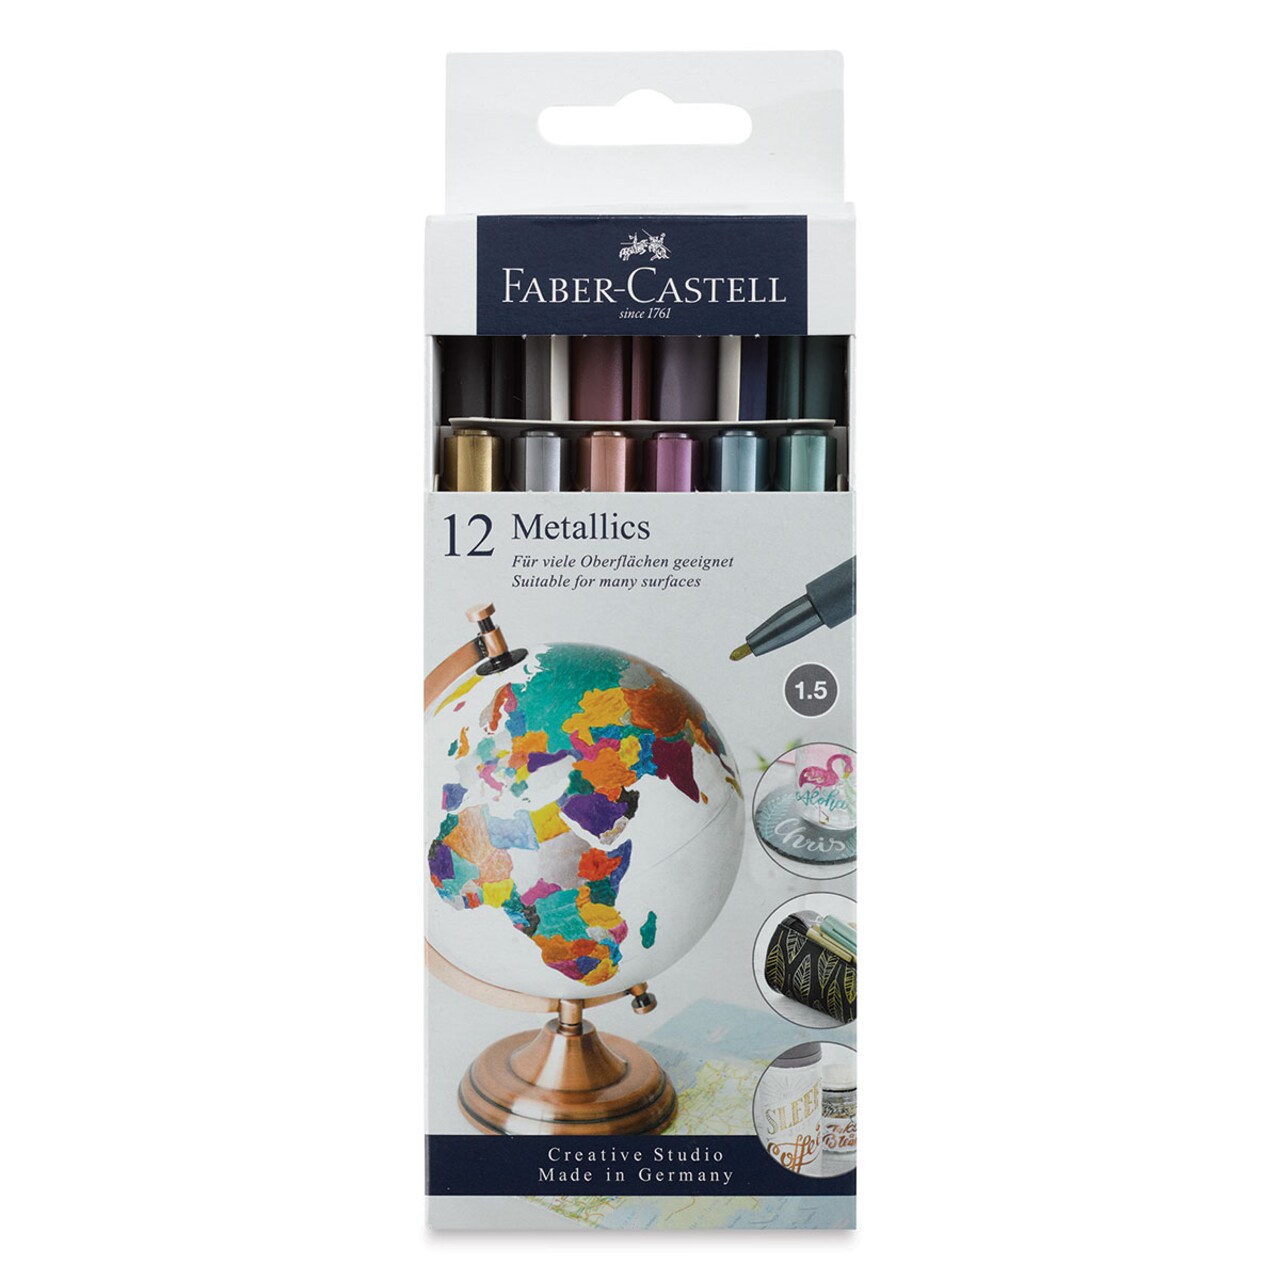 Faber-Castell Metallic Markers - Set of 12, 1.5 mm